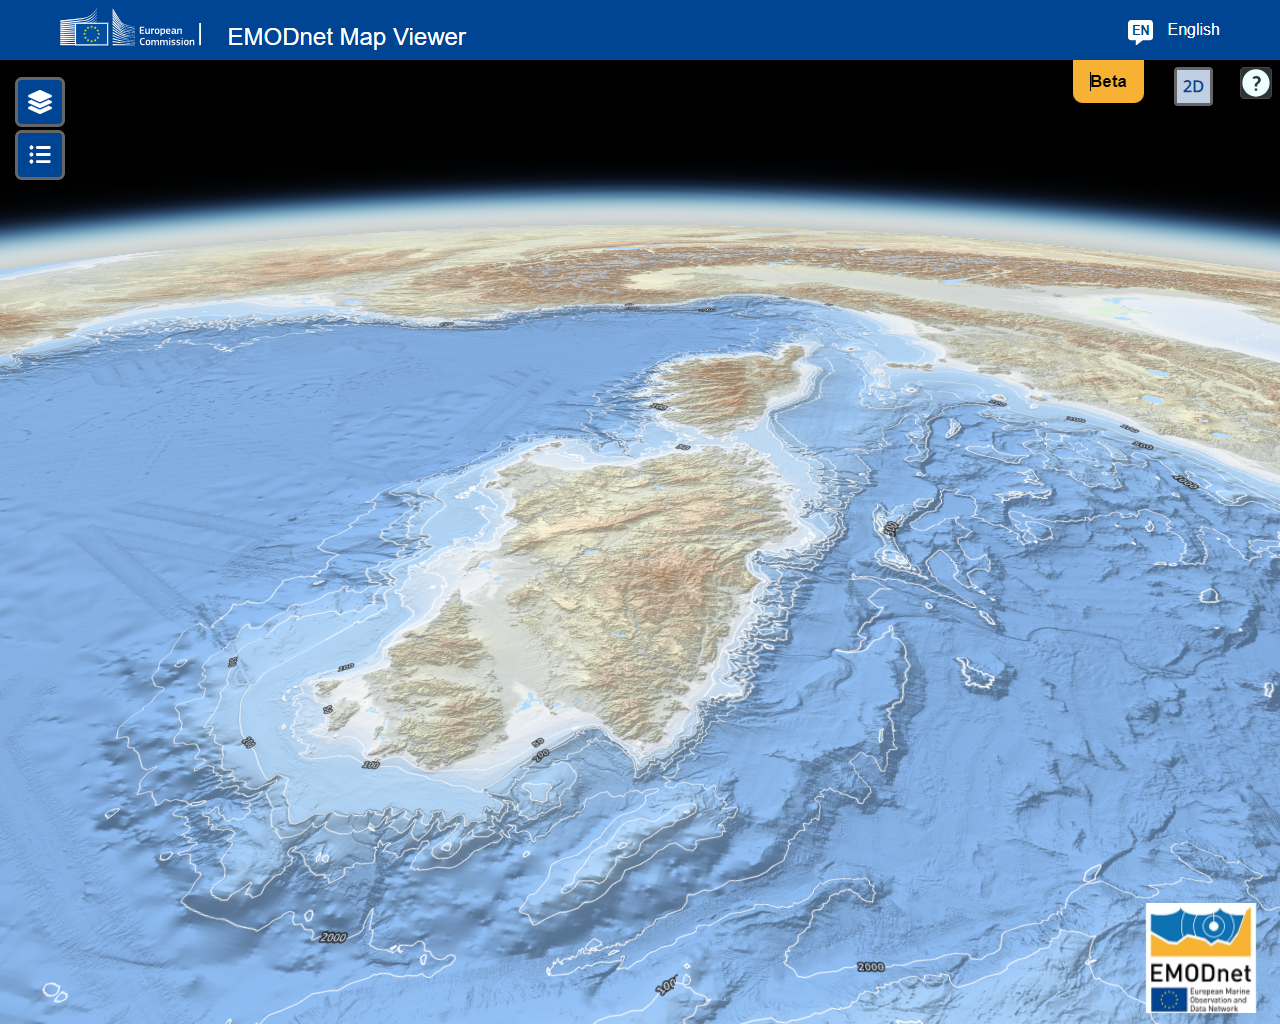 3D bathymetry of the Paleolithic Atlantic Ocean now known as the Mediterranean Sea 3